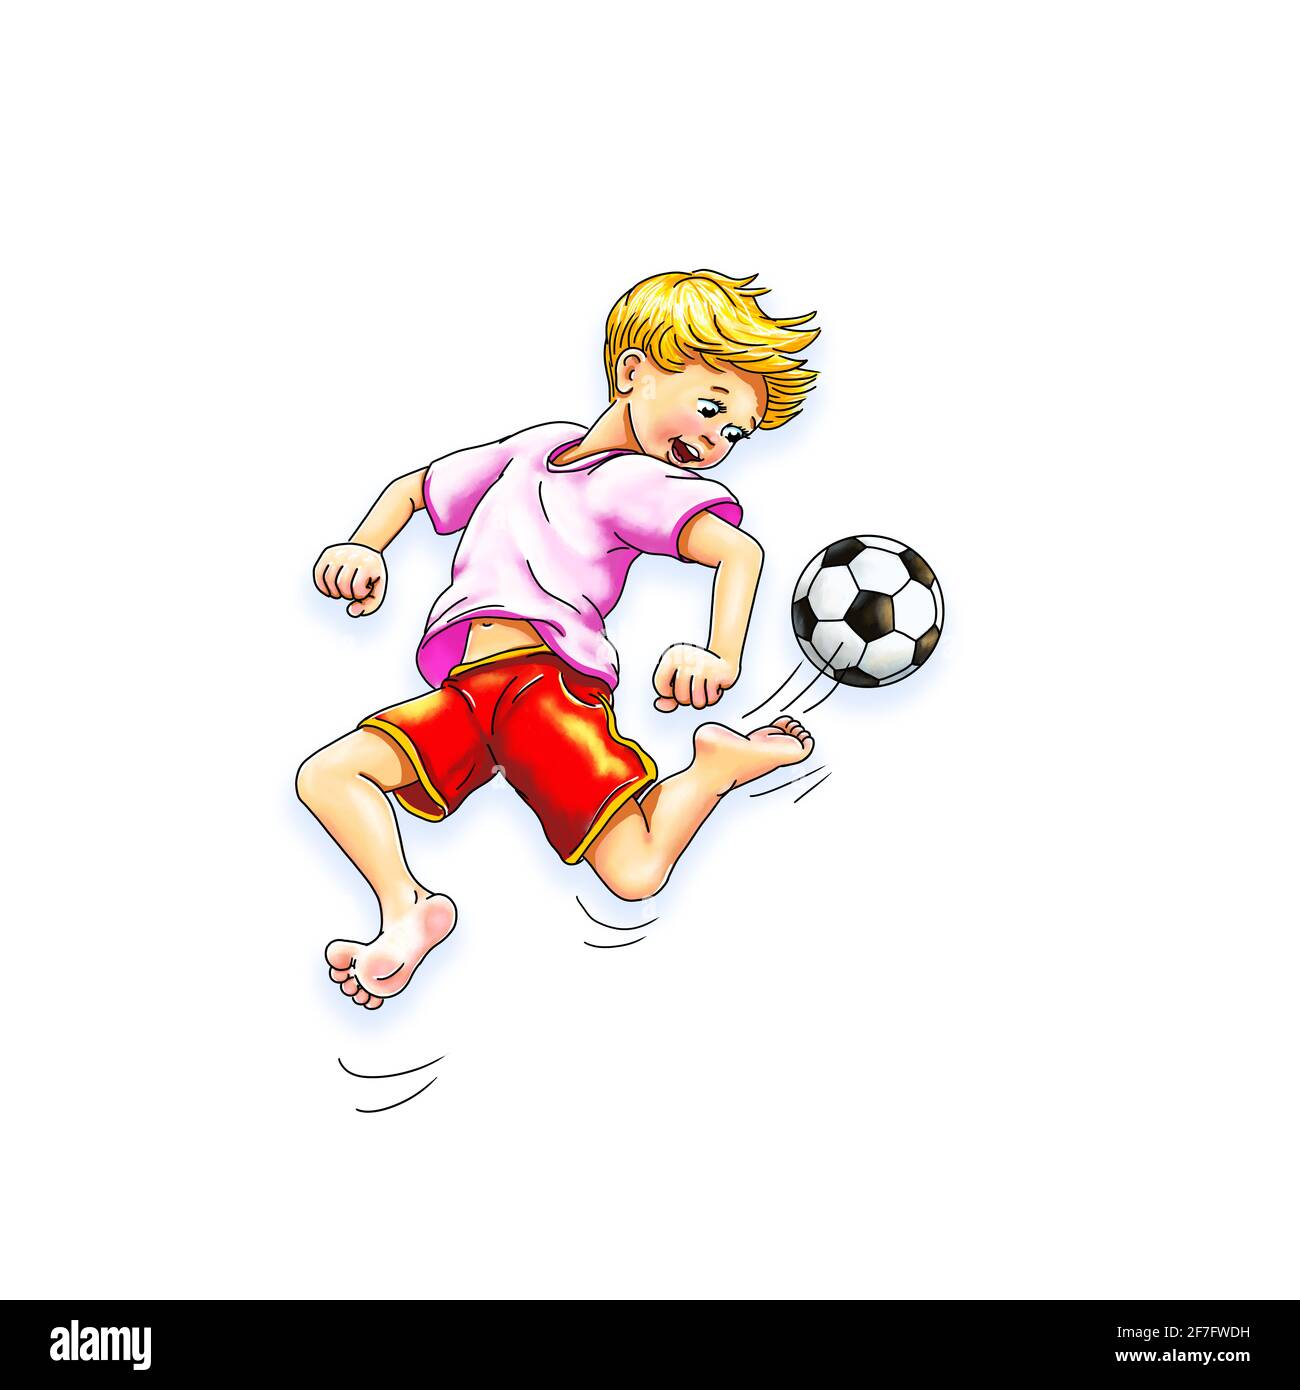 Soccer boy playing barefoot jumps kicks ball away jump youth club youth sport final Champions League child children active table football movement Stock Photo